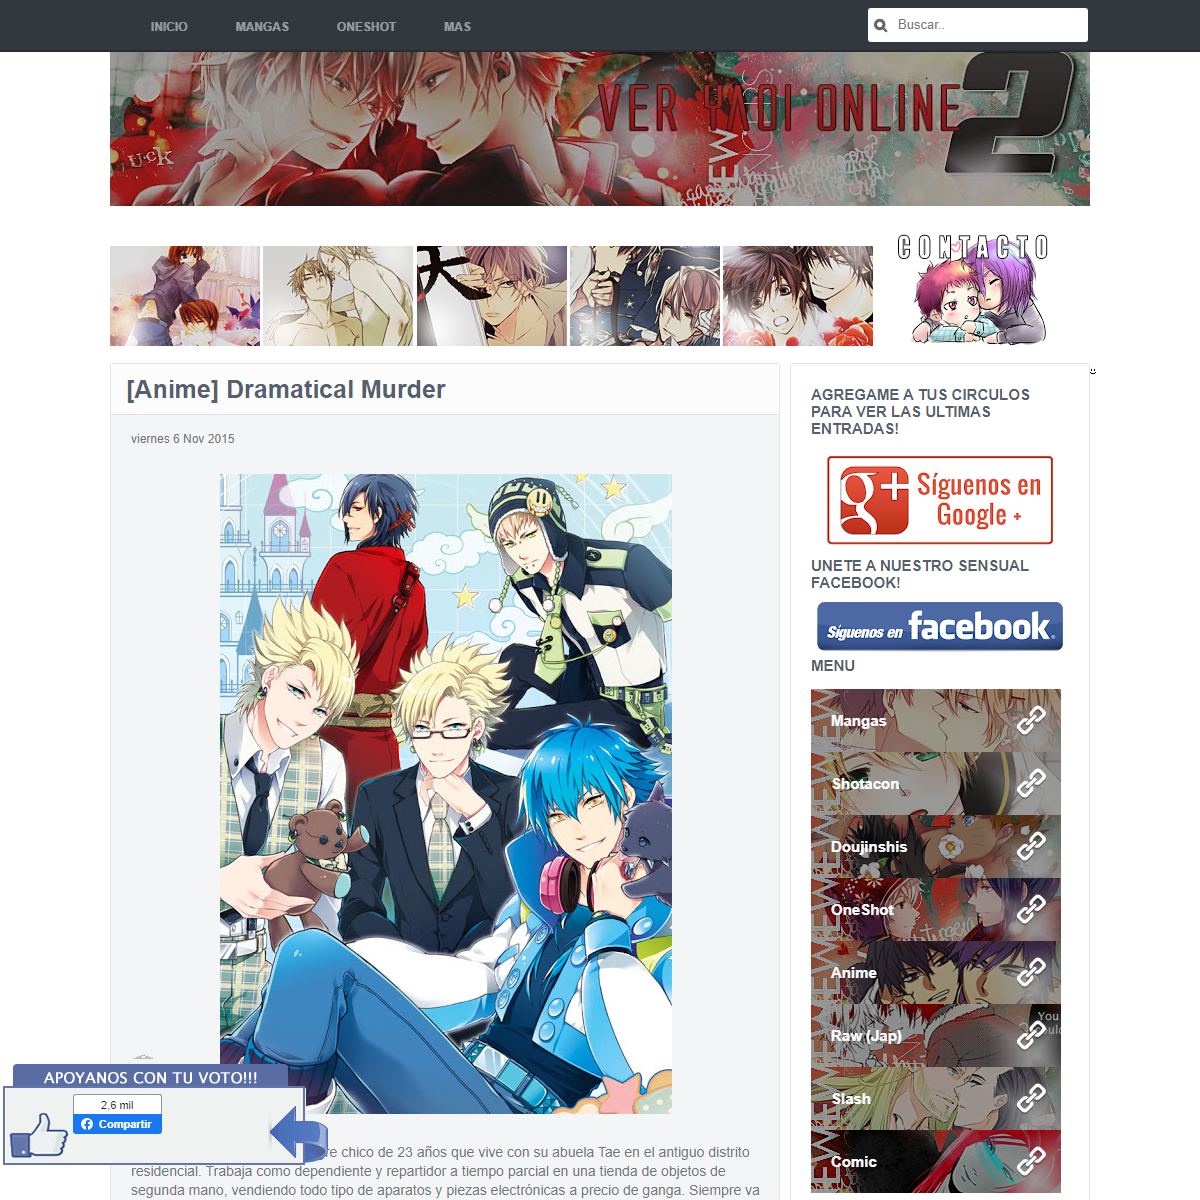 A complete backup of https://veryaoionline.net/2015/11/anime-dramatical-murder.html